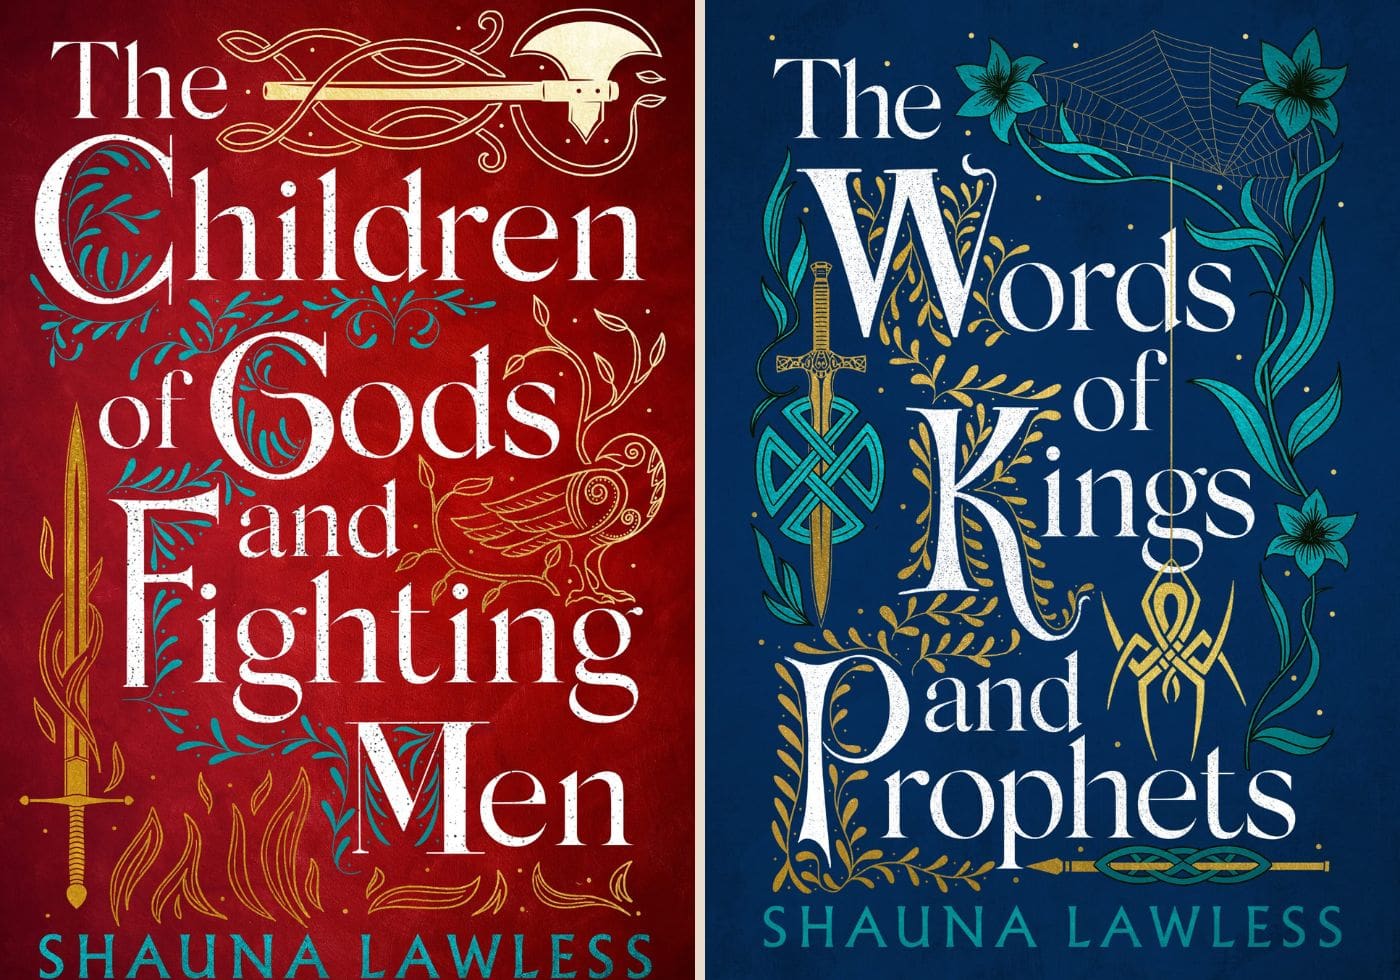 The Gael Song Series by Shauna Lawless